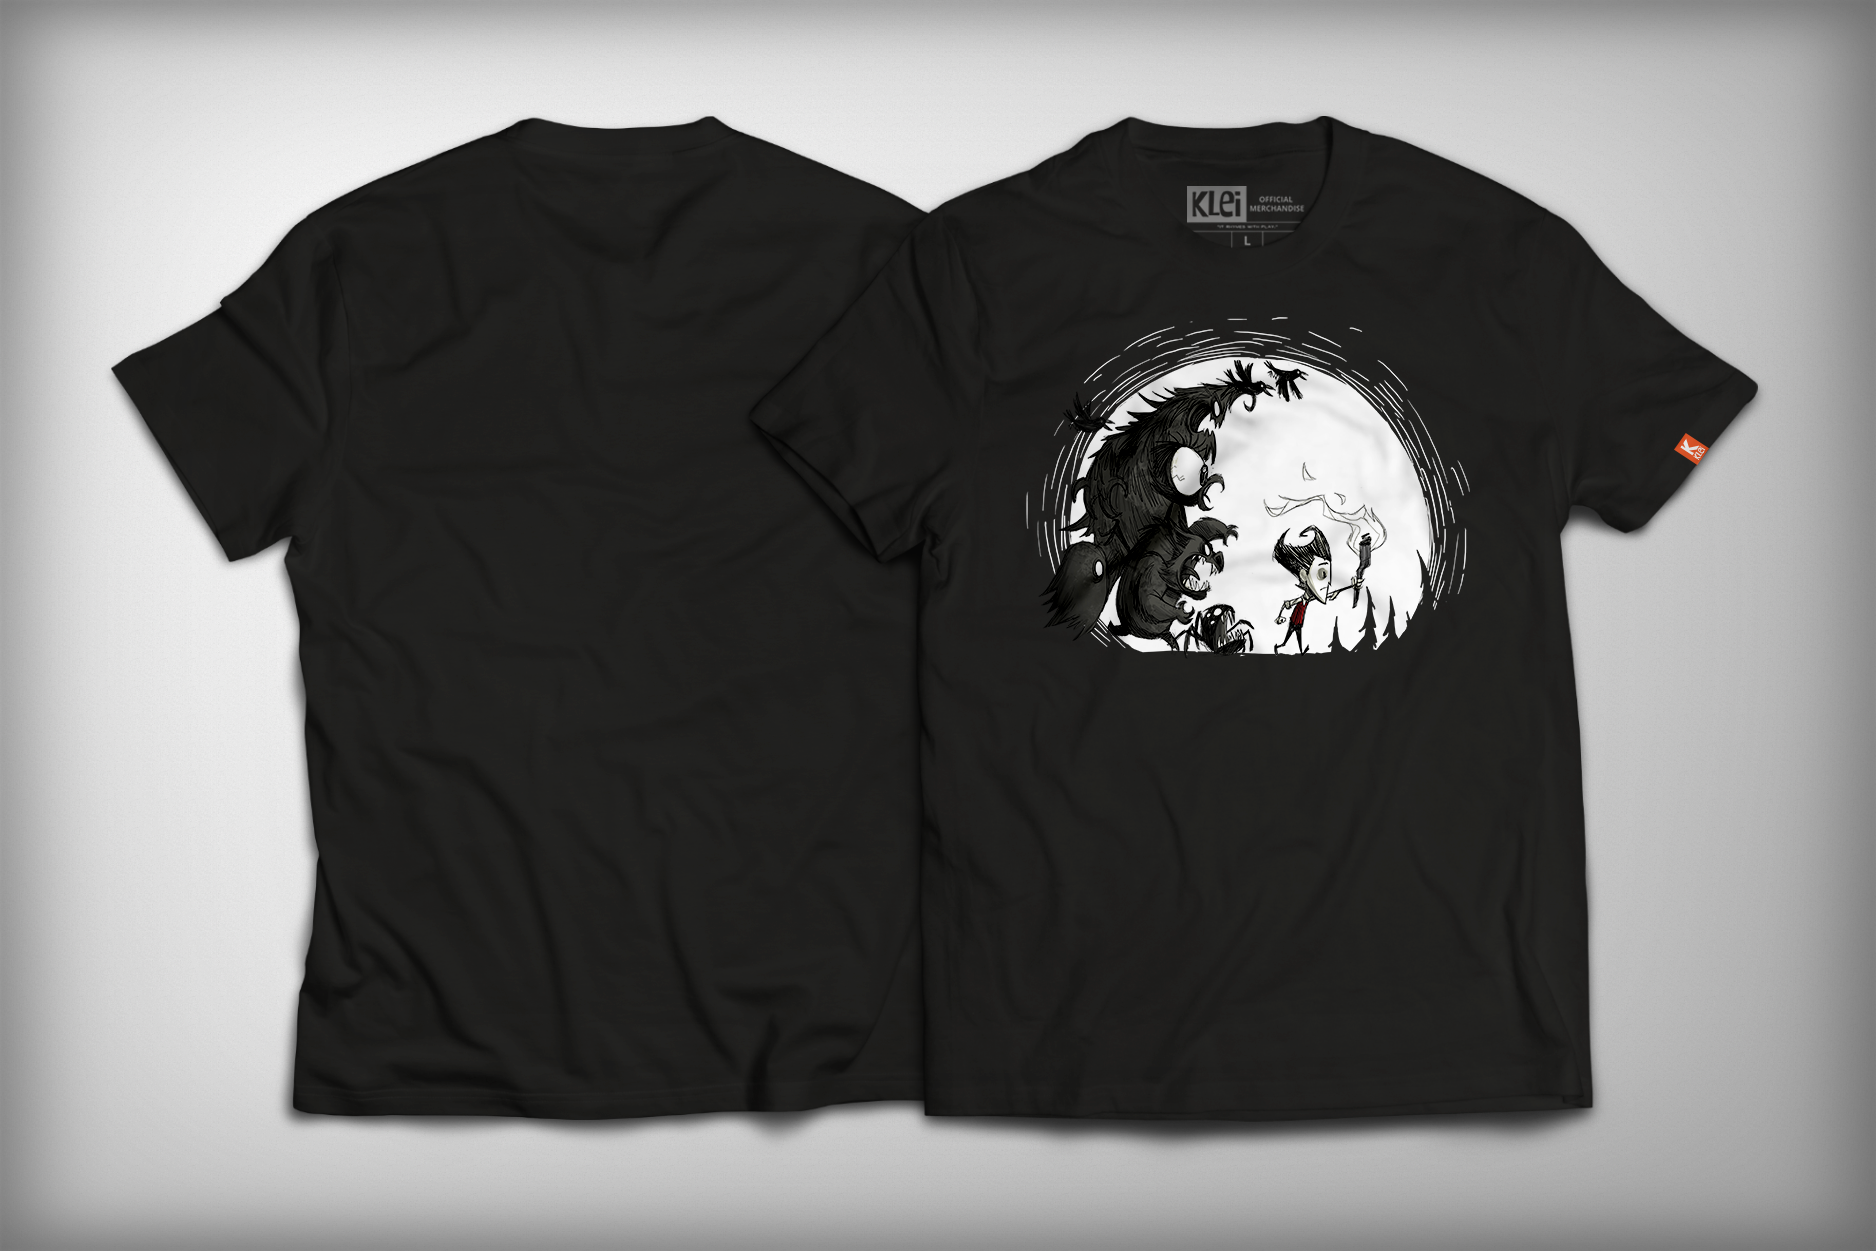 Wilson Alone in the Dark Shirt Front and Back